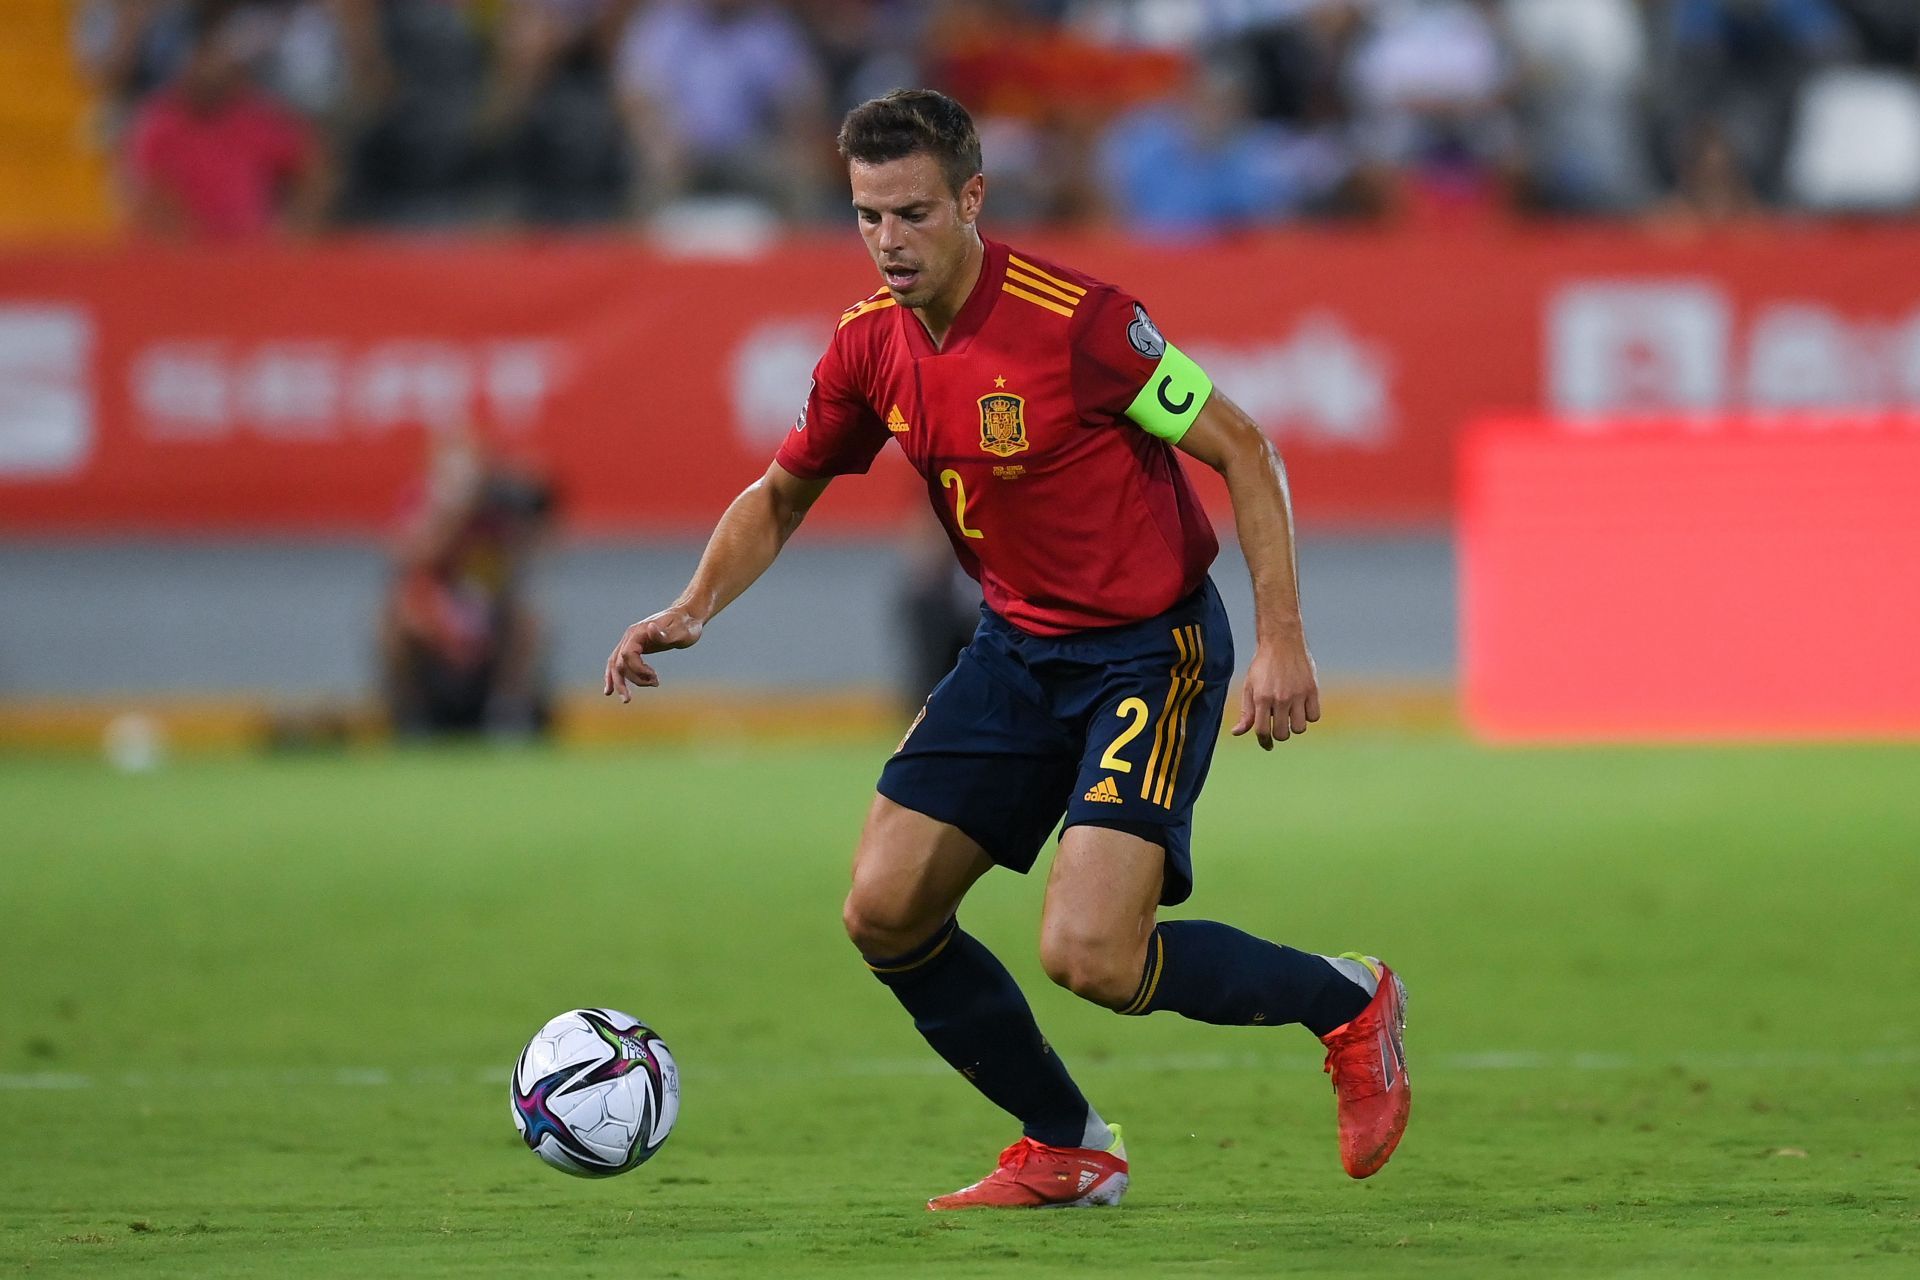 Cesar Azpilicueta has captained both club and country in recent seasons